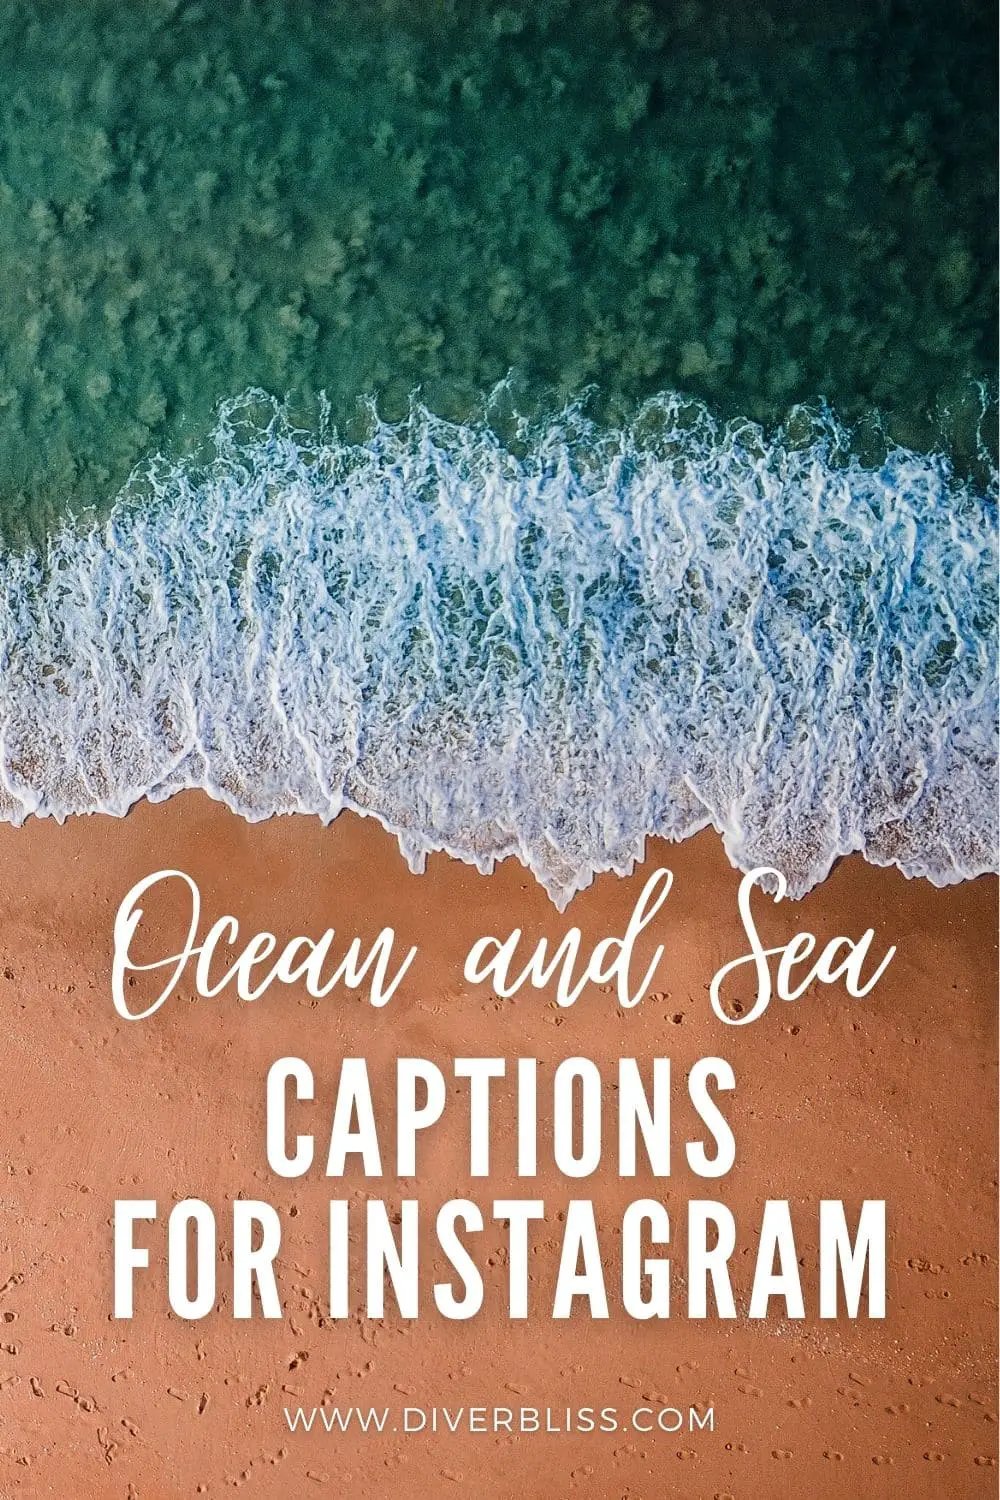 Ocean and sea captions for instagram